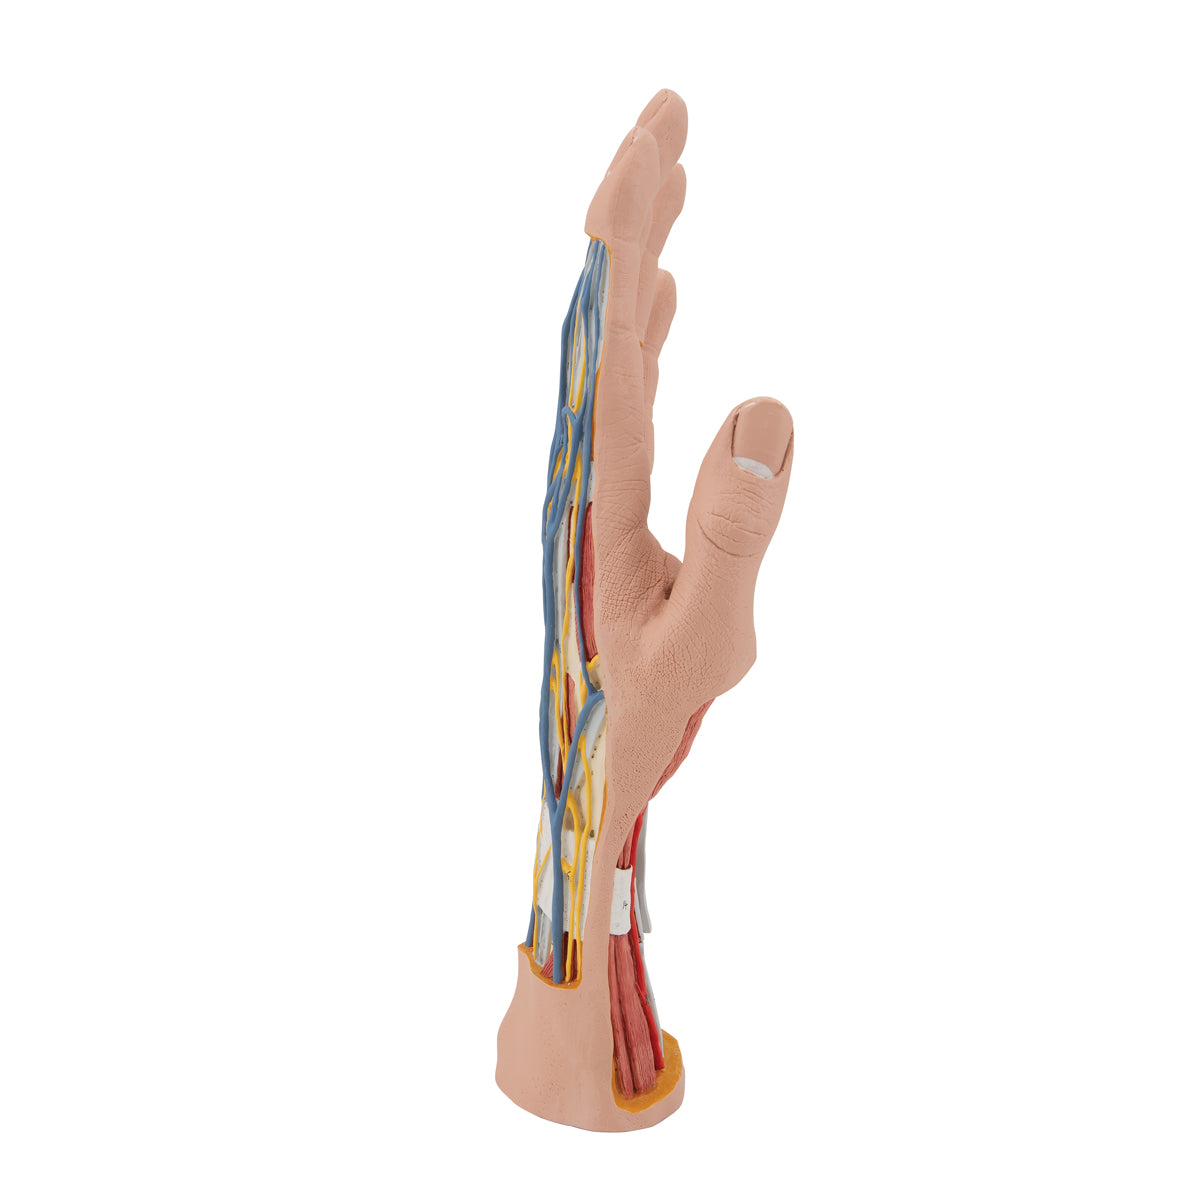 Complete hand model with skin, muscles, tendons, vessels and nerves - can be separated into 3 parts